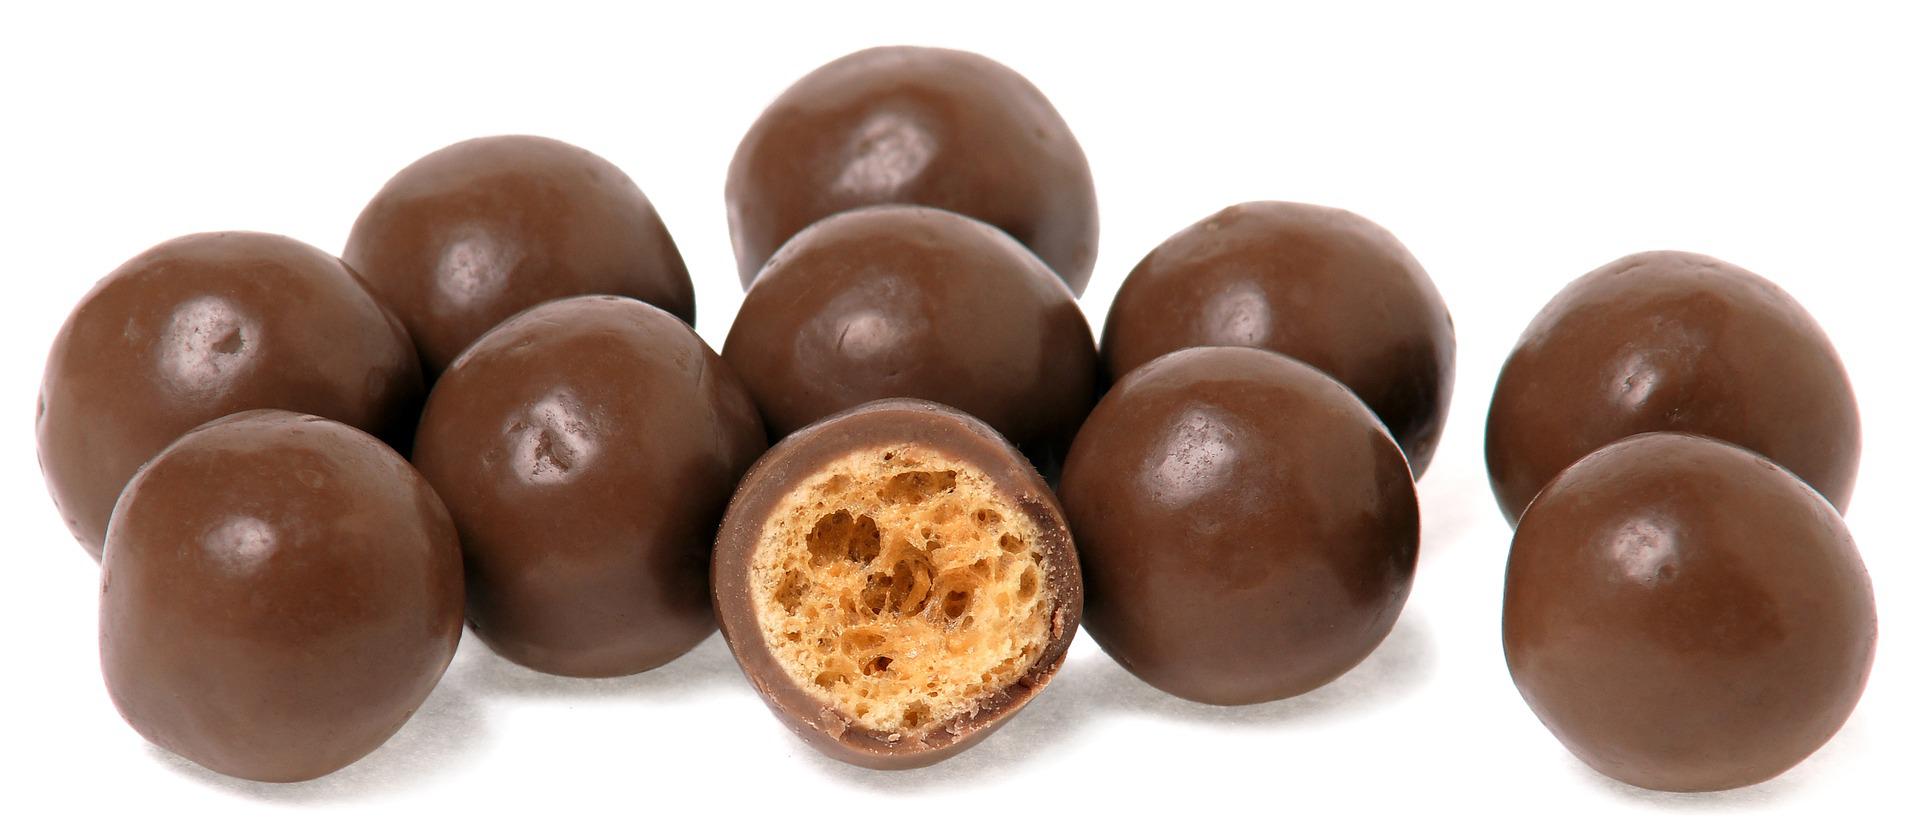 MARS has SHRUNK the size of its sharing bags of Maltesers by seven chocs each - but is keeping the price the same.